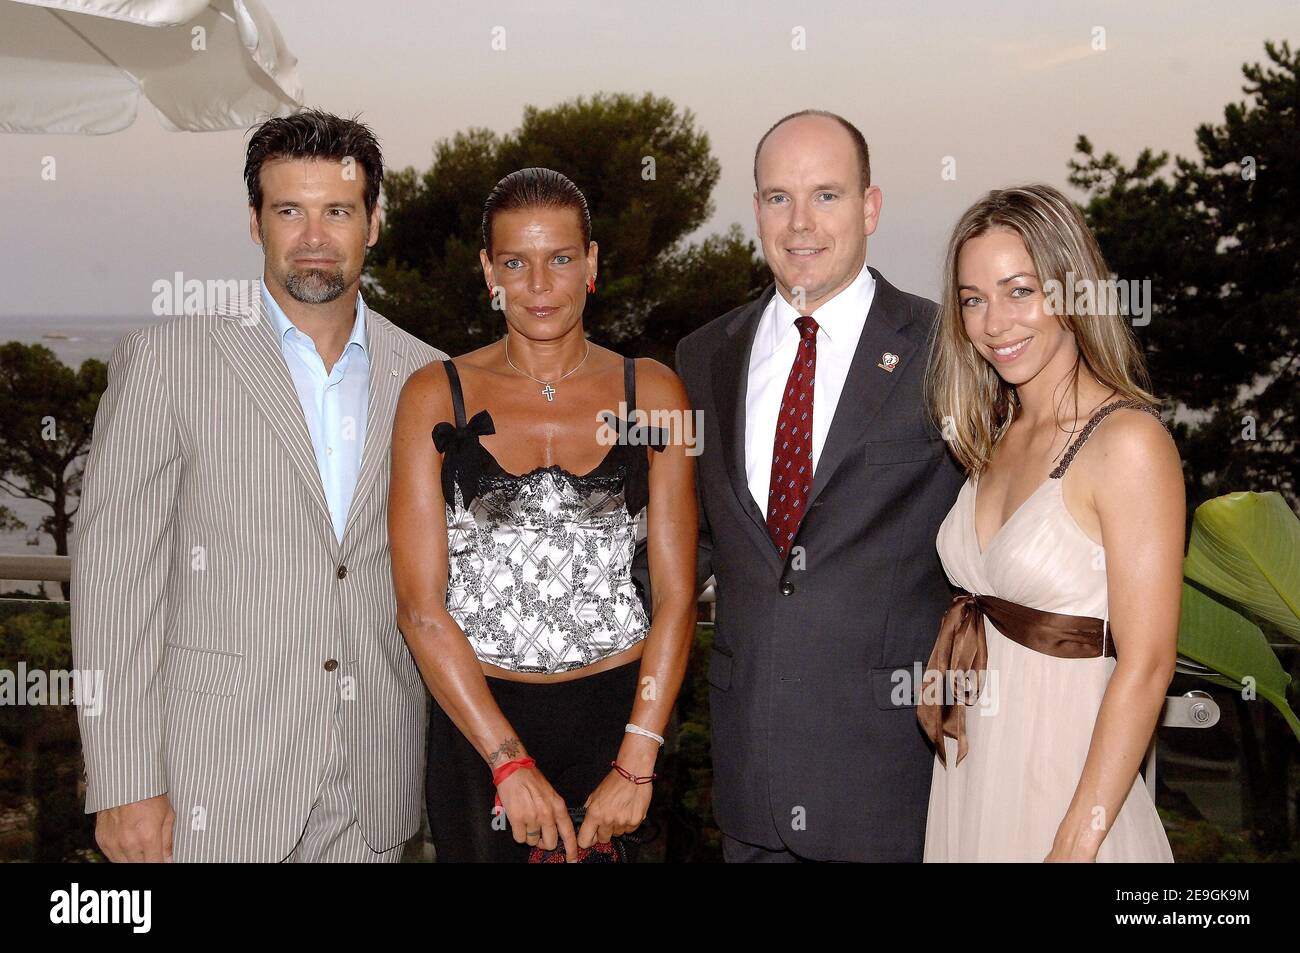 Princess Stephanie of Monaco and Prince Albert II along with Roch Voisine and his wife Myriam attend the 'Figh Aids Monaco' party held at the Sporting in Monaco, on July 21, 2006. Photo by Pool SBM/ABACAPRESS.COM Stock Photo